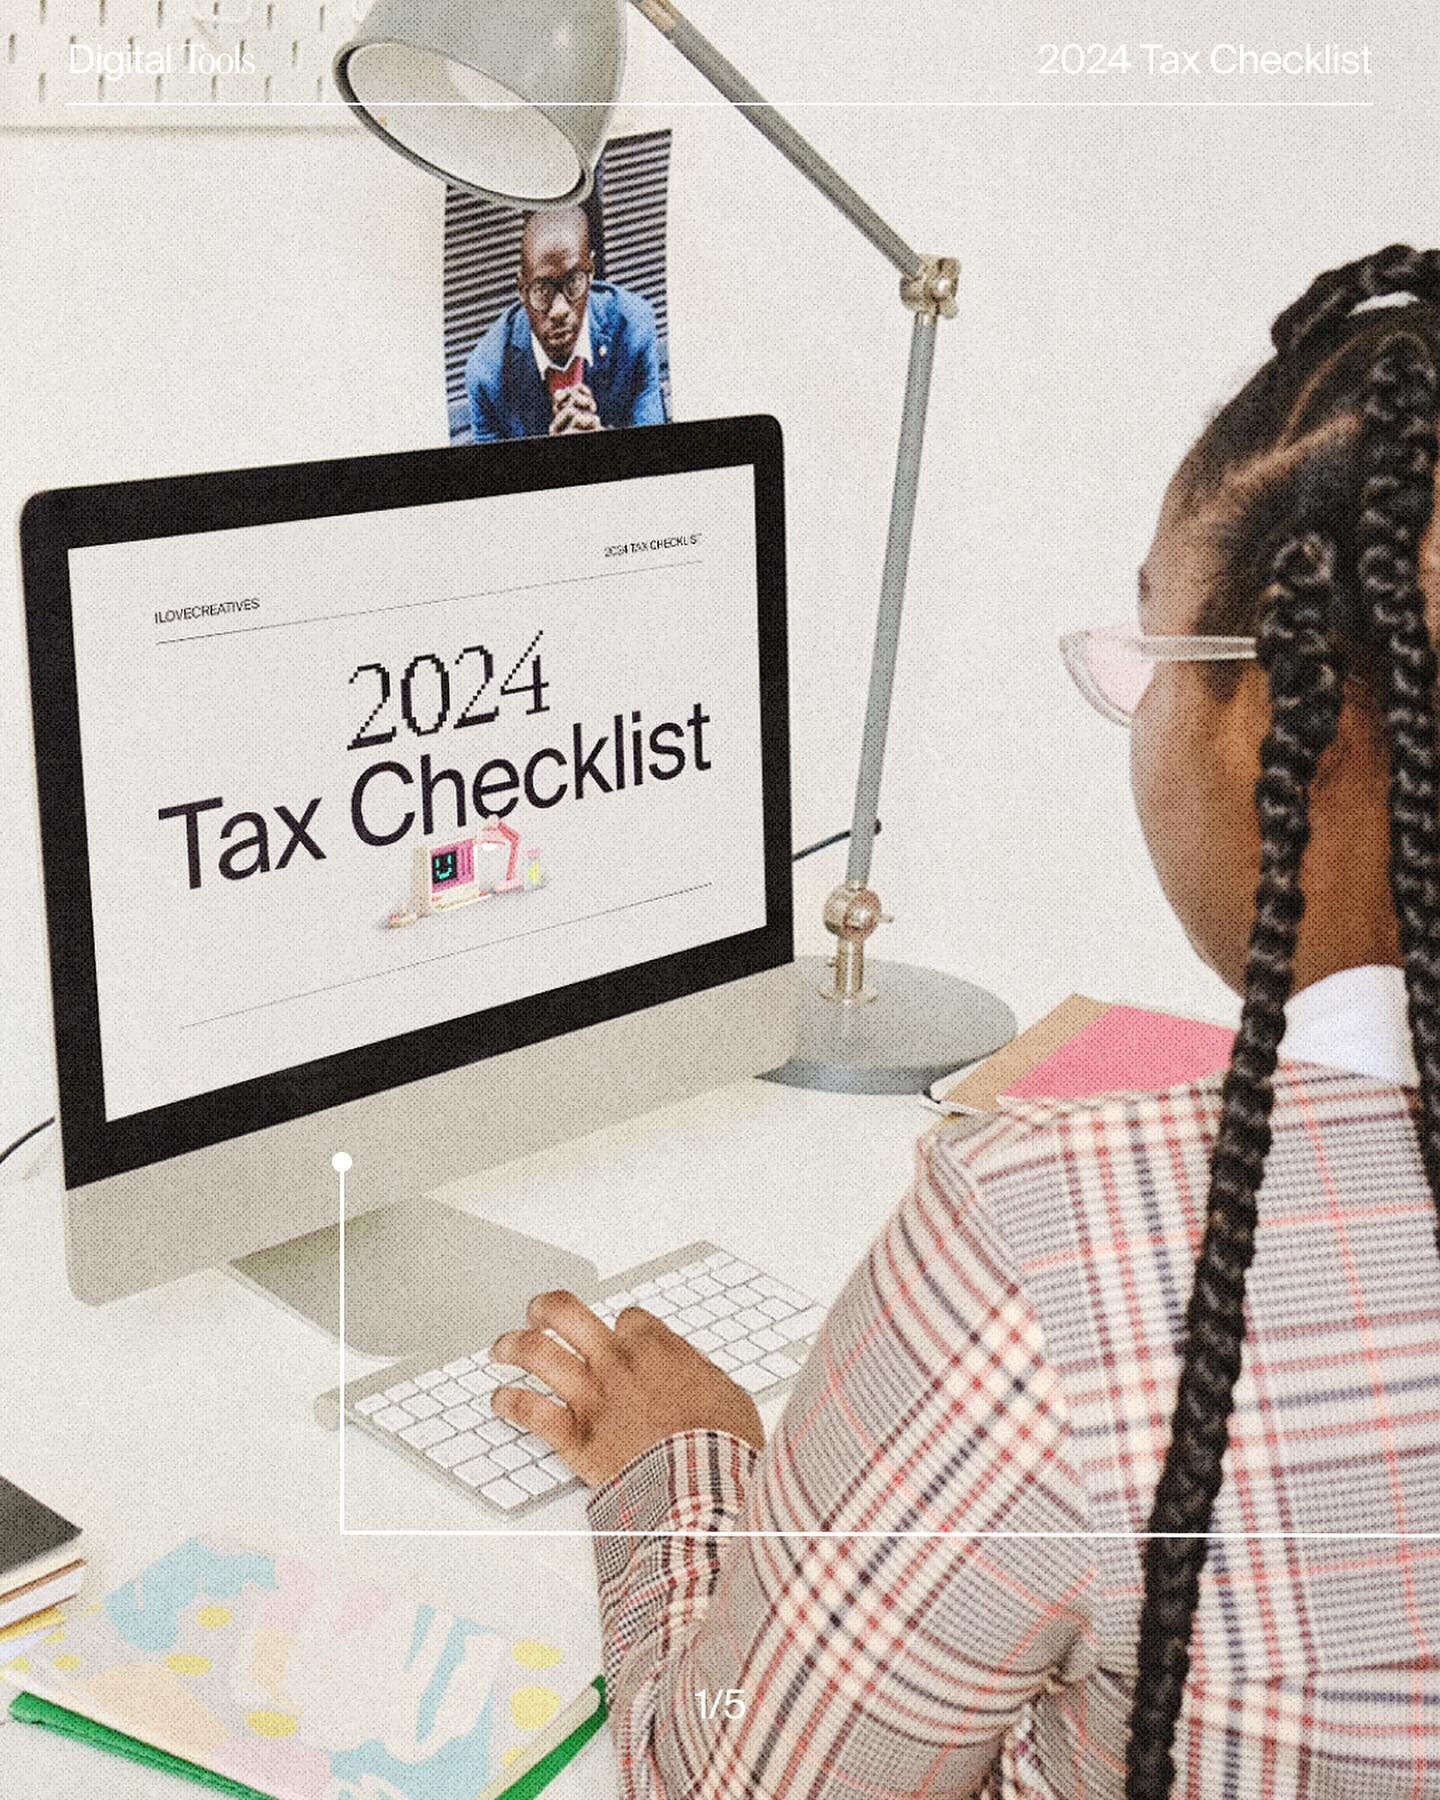 We hope you&rsquo;re rounding up allll your 1099&rsquo;s, because it&rsquo;s Tax Season! 💸 Before you panic (don&rsquo;t worry, we gotchu), we put together a quick 2024 Tax Checklist for freelancers and small business owners to remind you of what yo